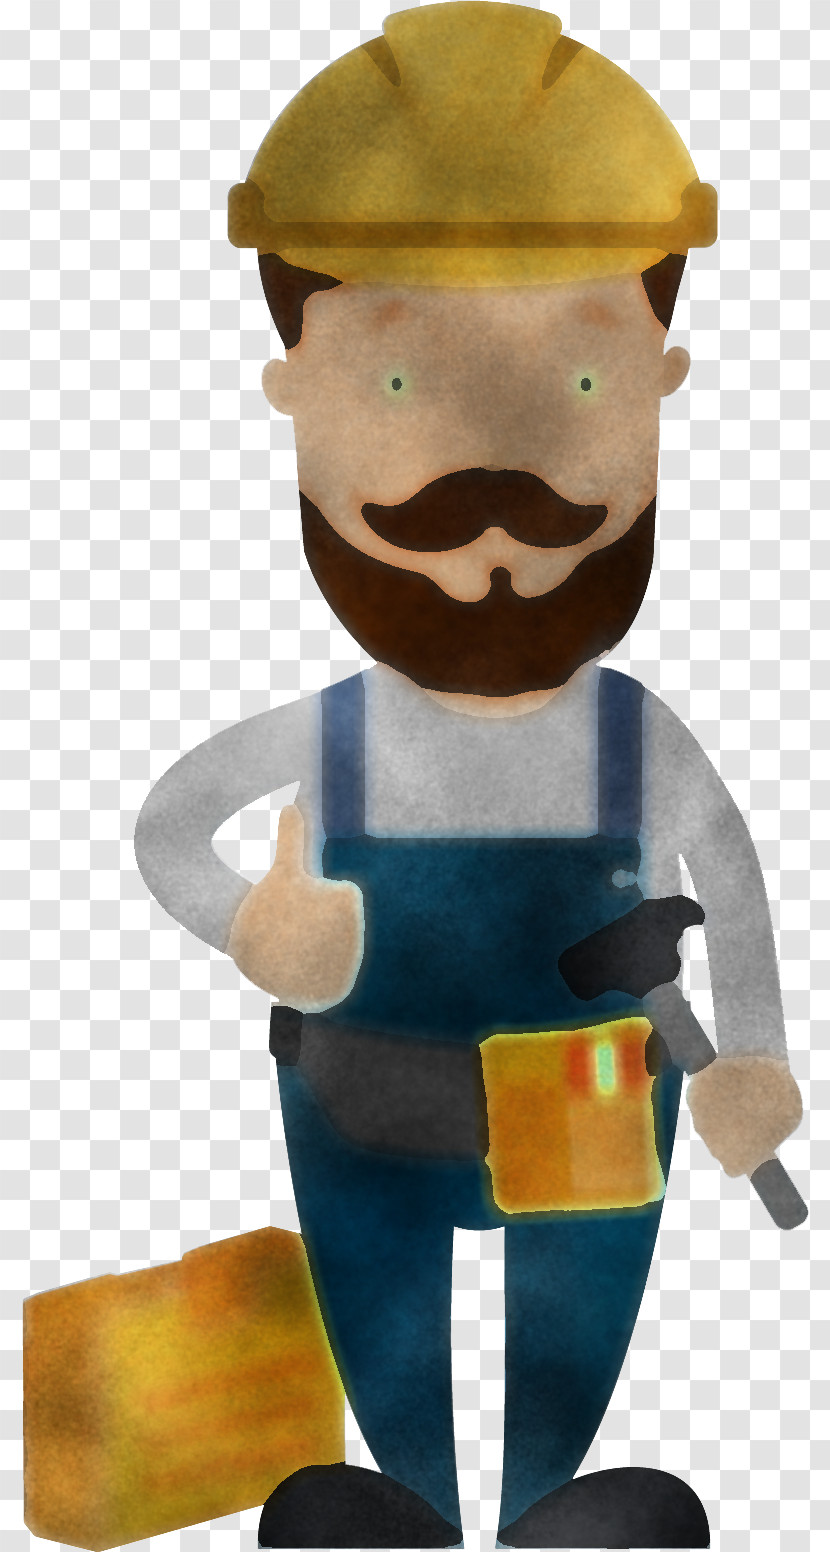 Cartoon Toy Figurine Animation Cook Transparent PNG